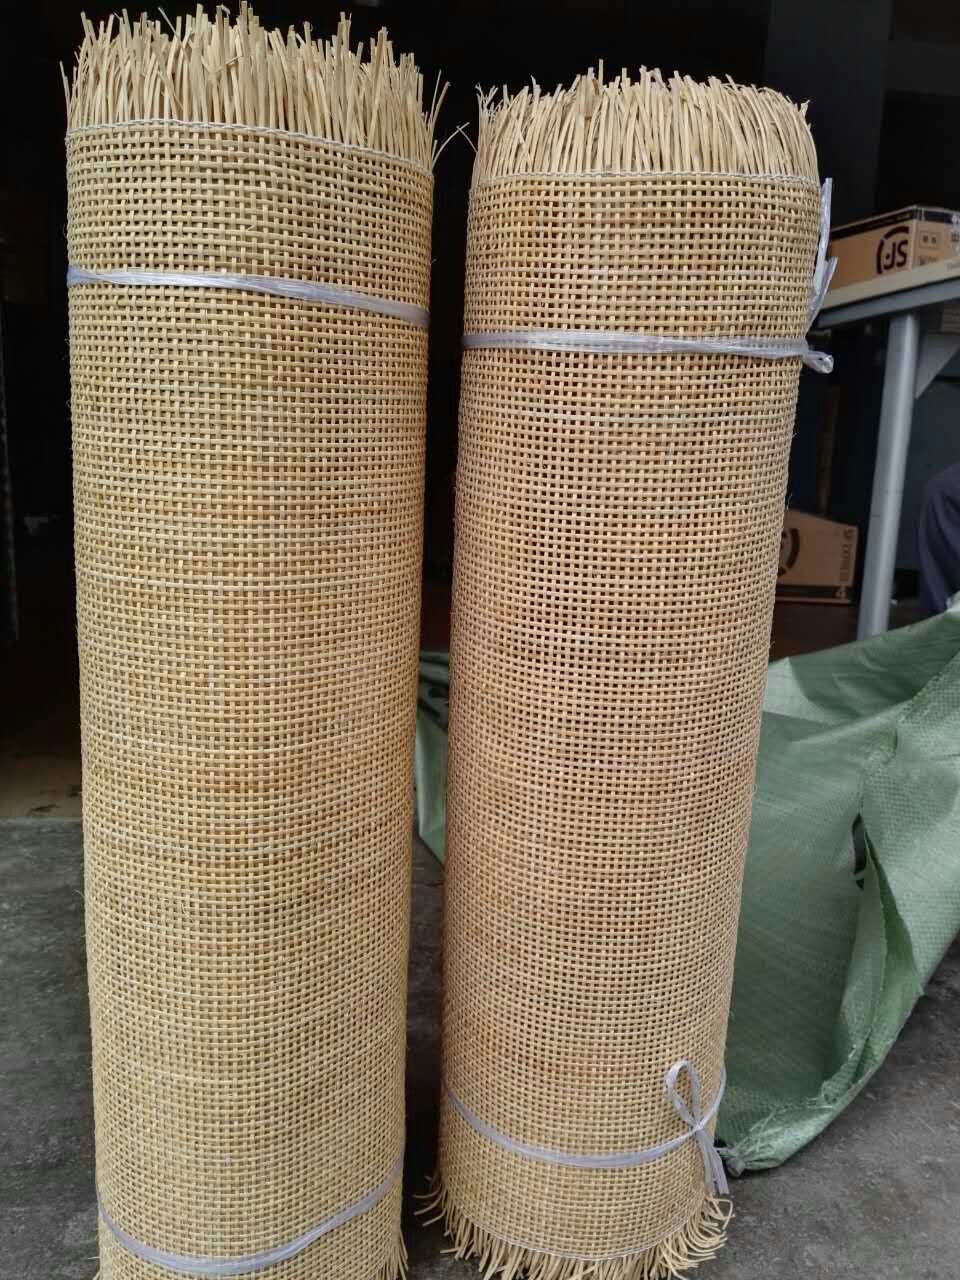 Rattan Mesh Roll Sheet Webbing Caning Material For Chairs-Kit Multi-size  Options